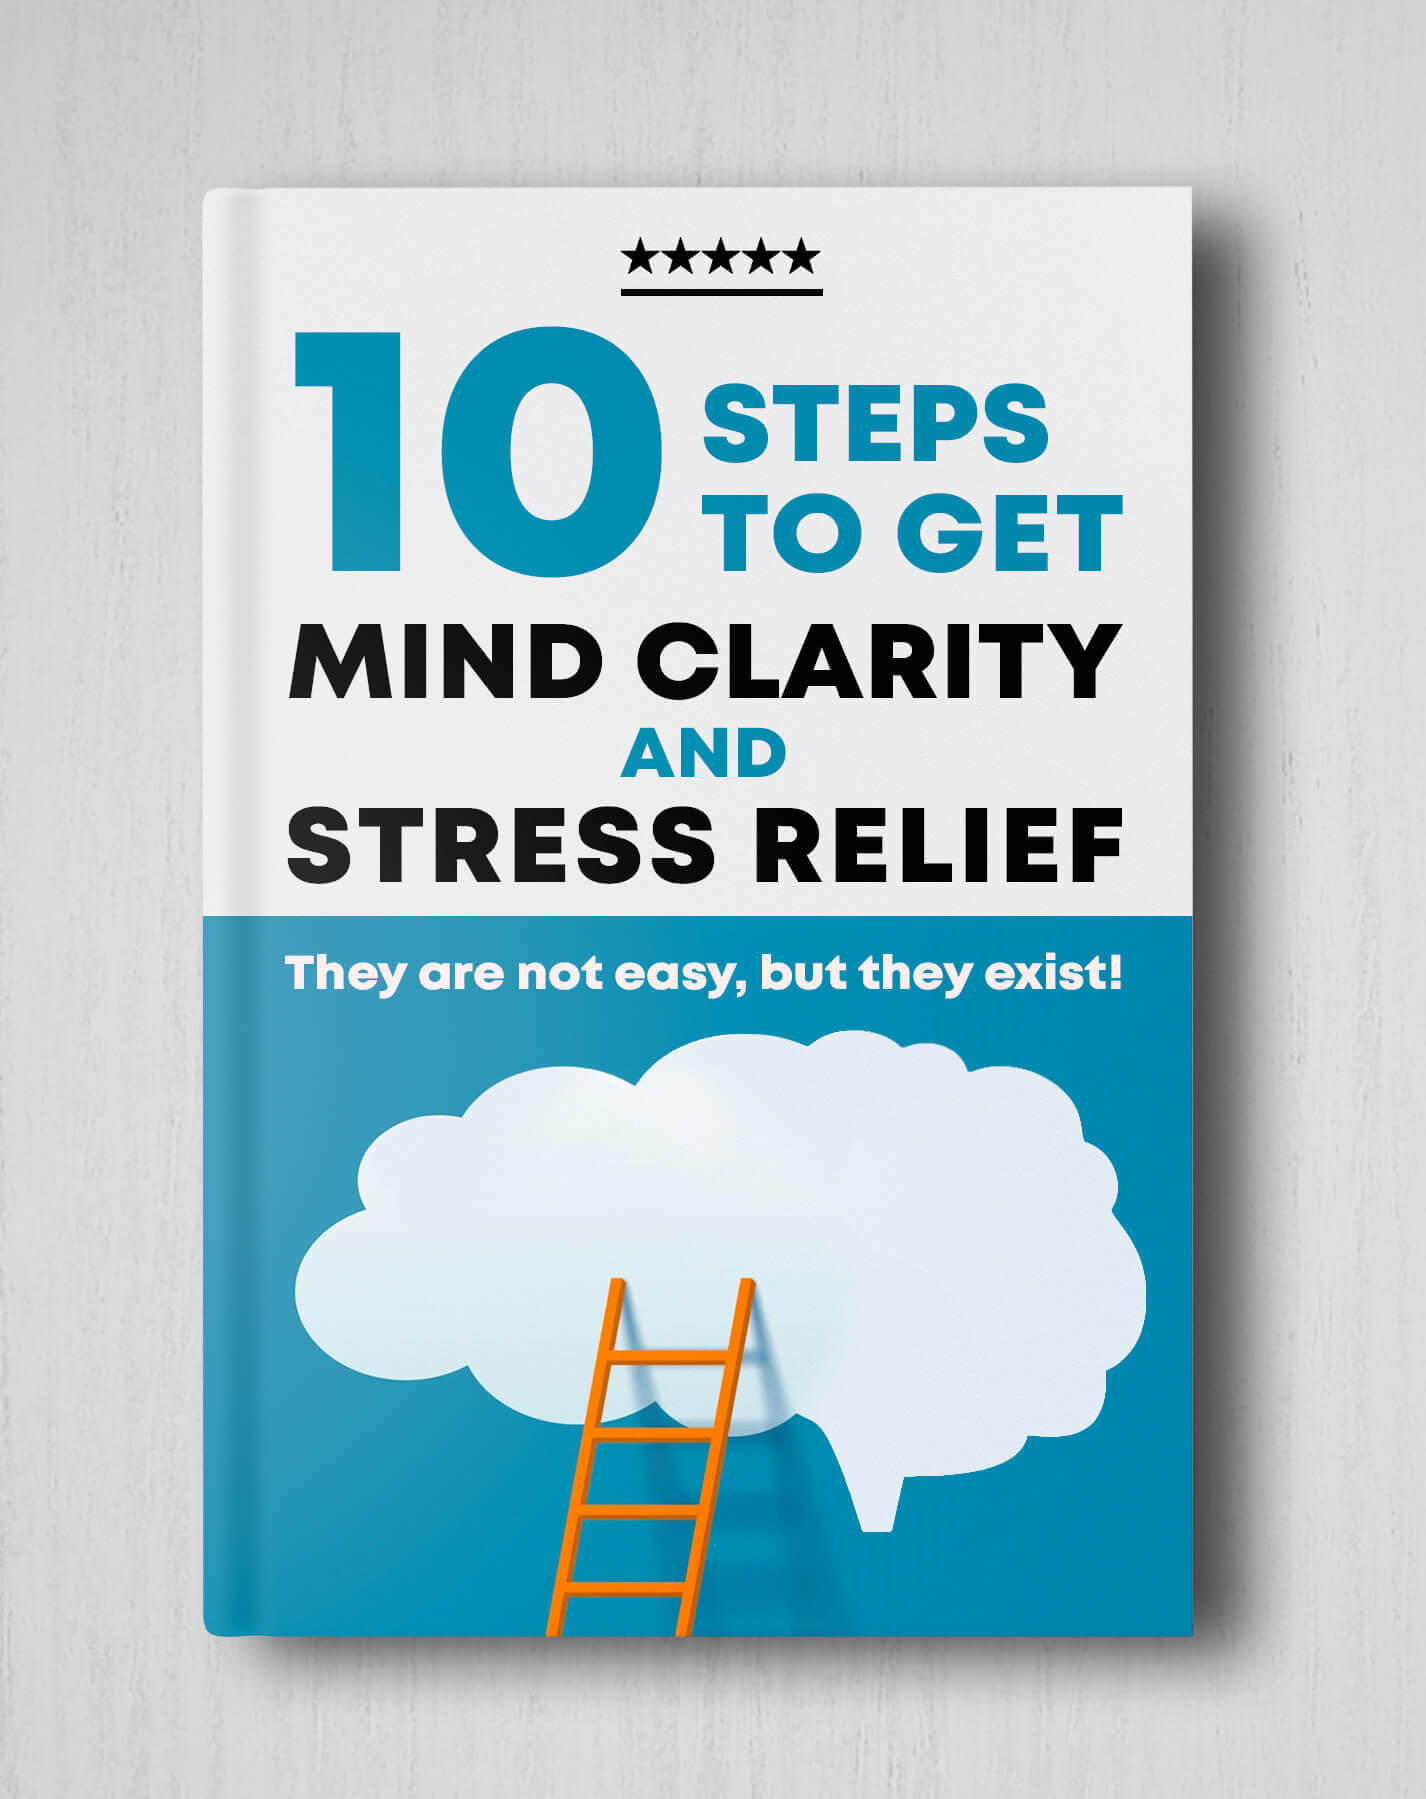 10 steps to get mind clarity and stress relief-Ethicherbs